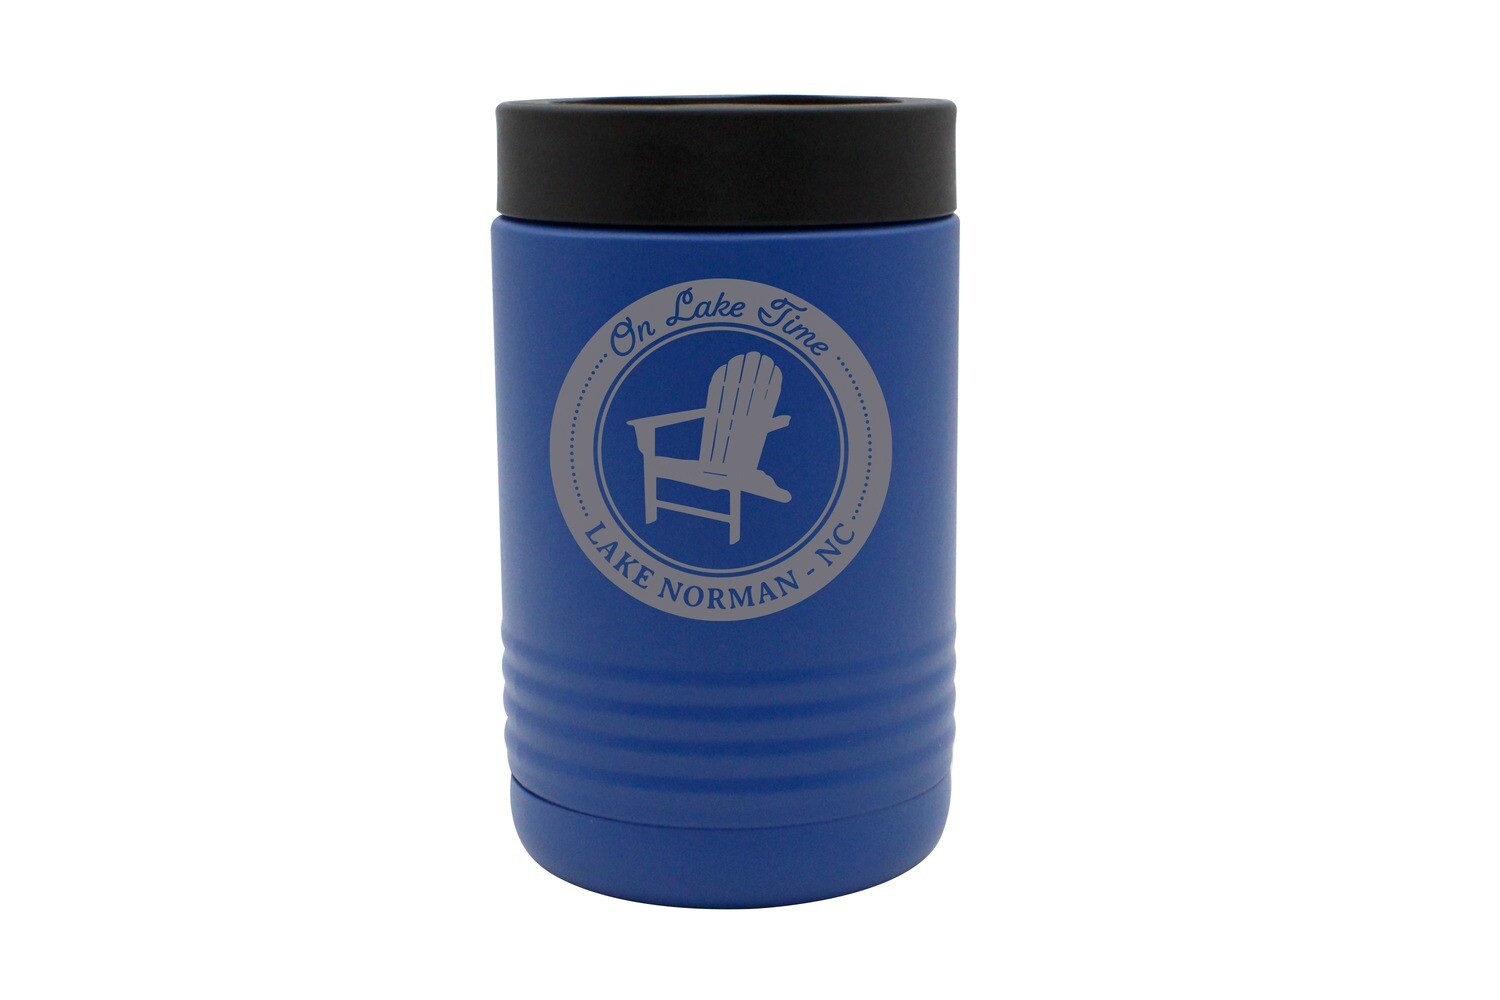 On Lake Time w/Chair & Customized Location Insulated Beverage Holder